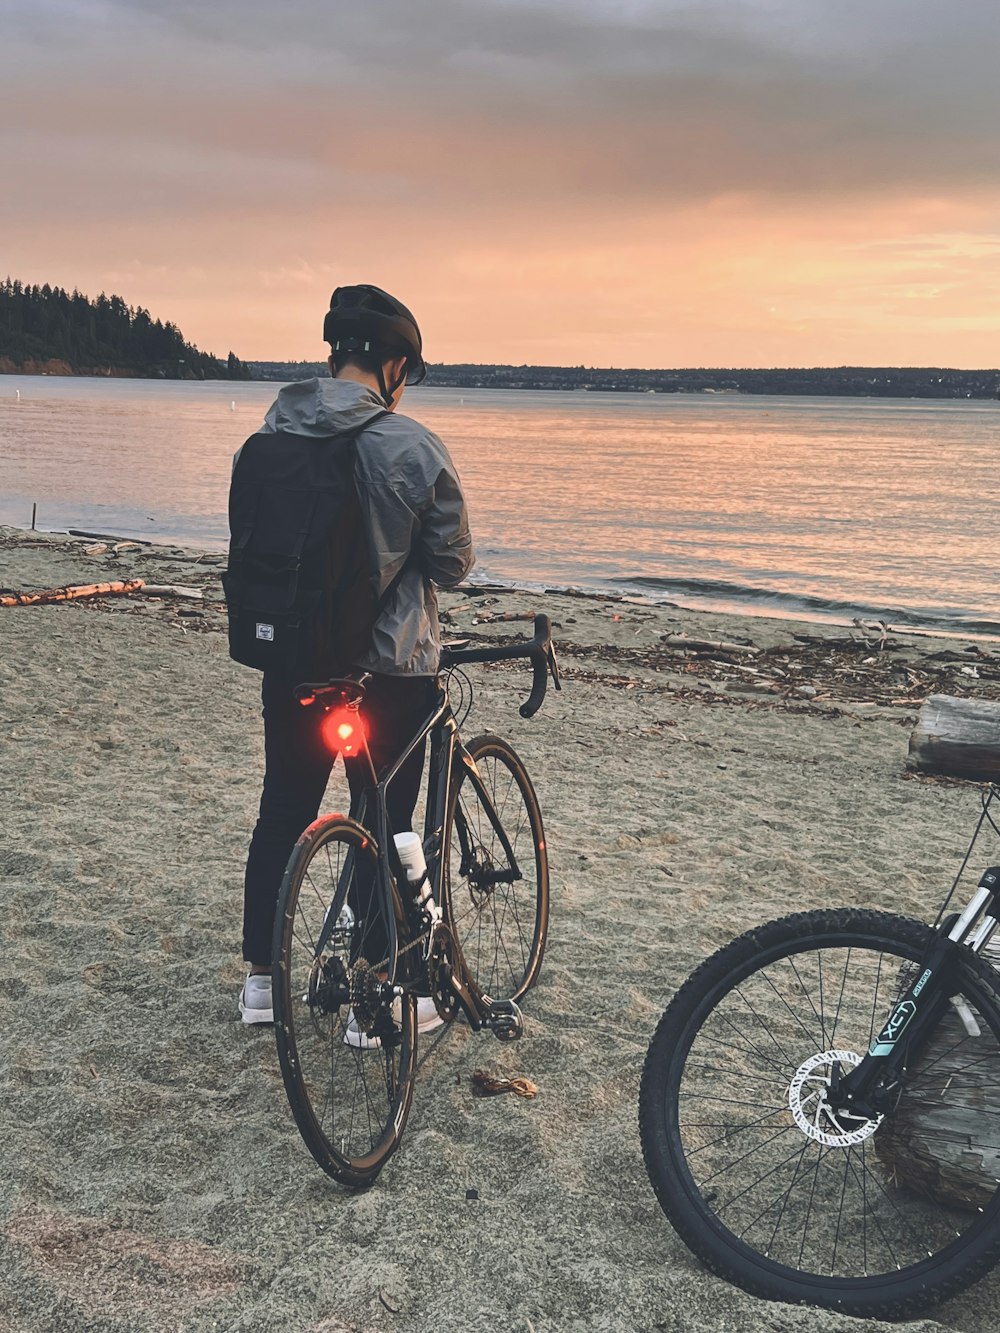 a person standing next to a bike on a beach